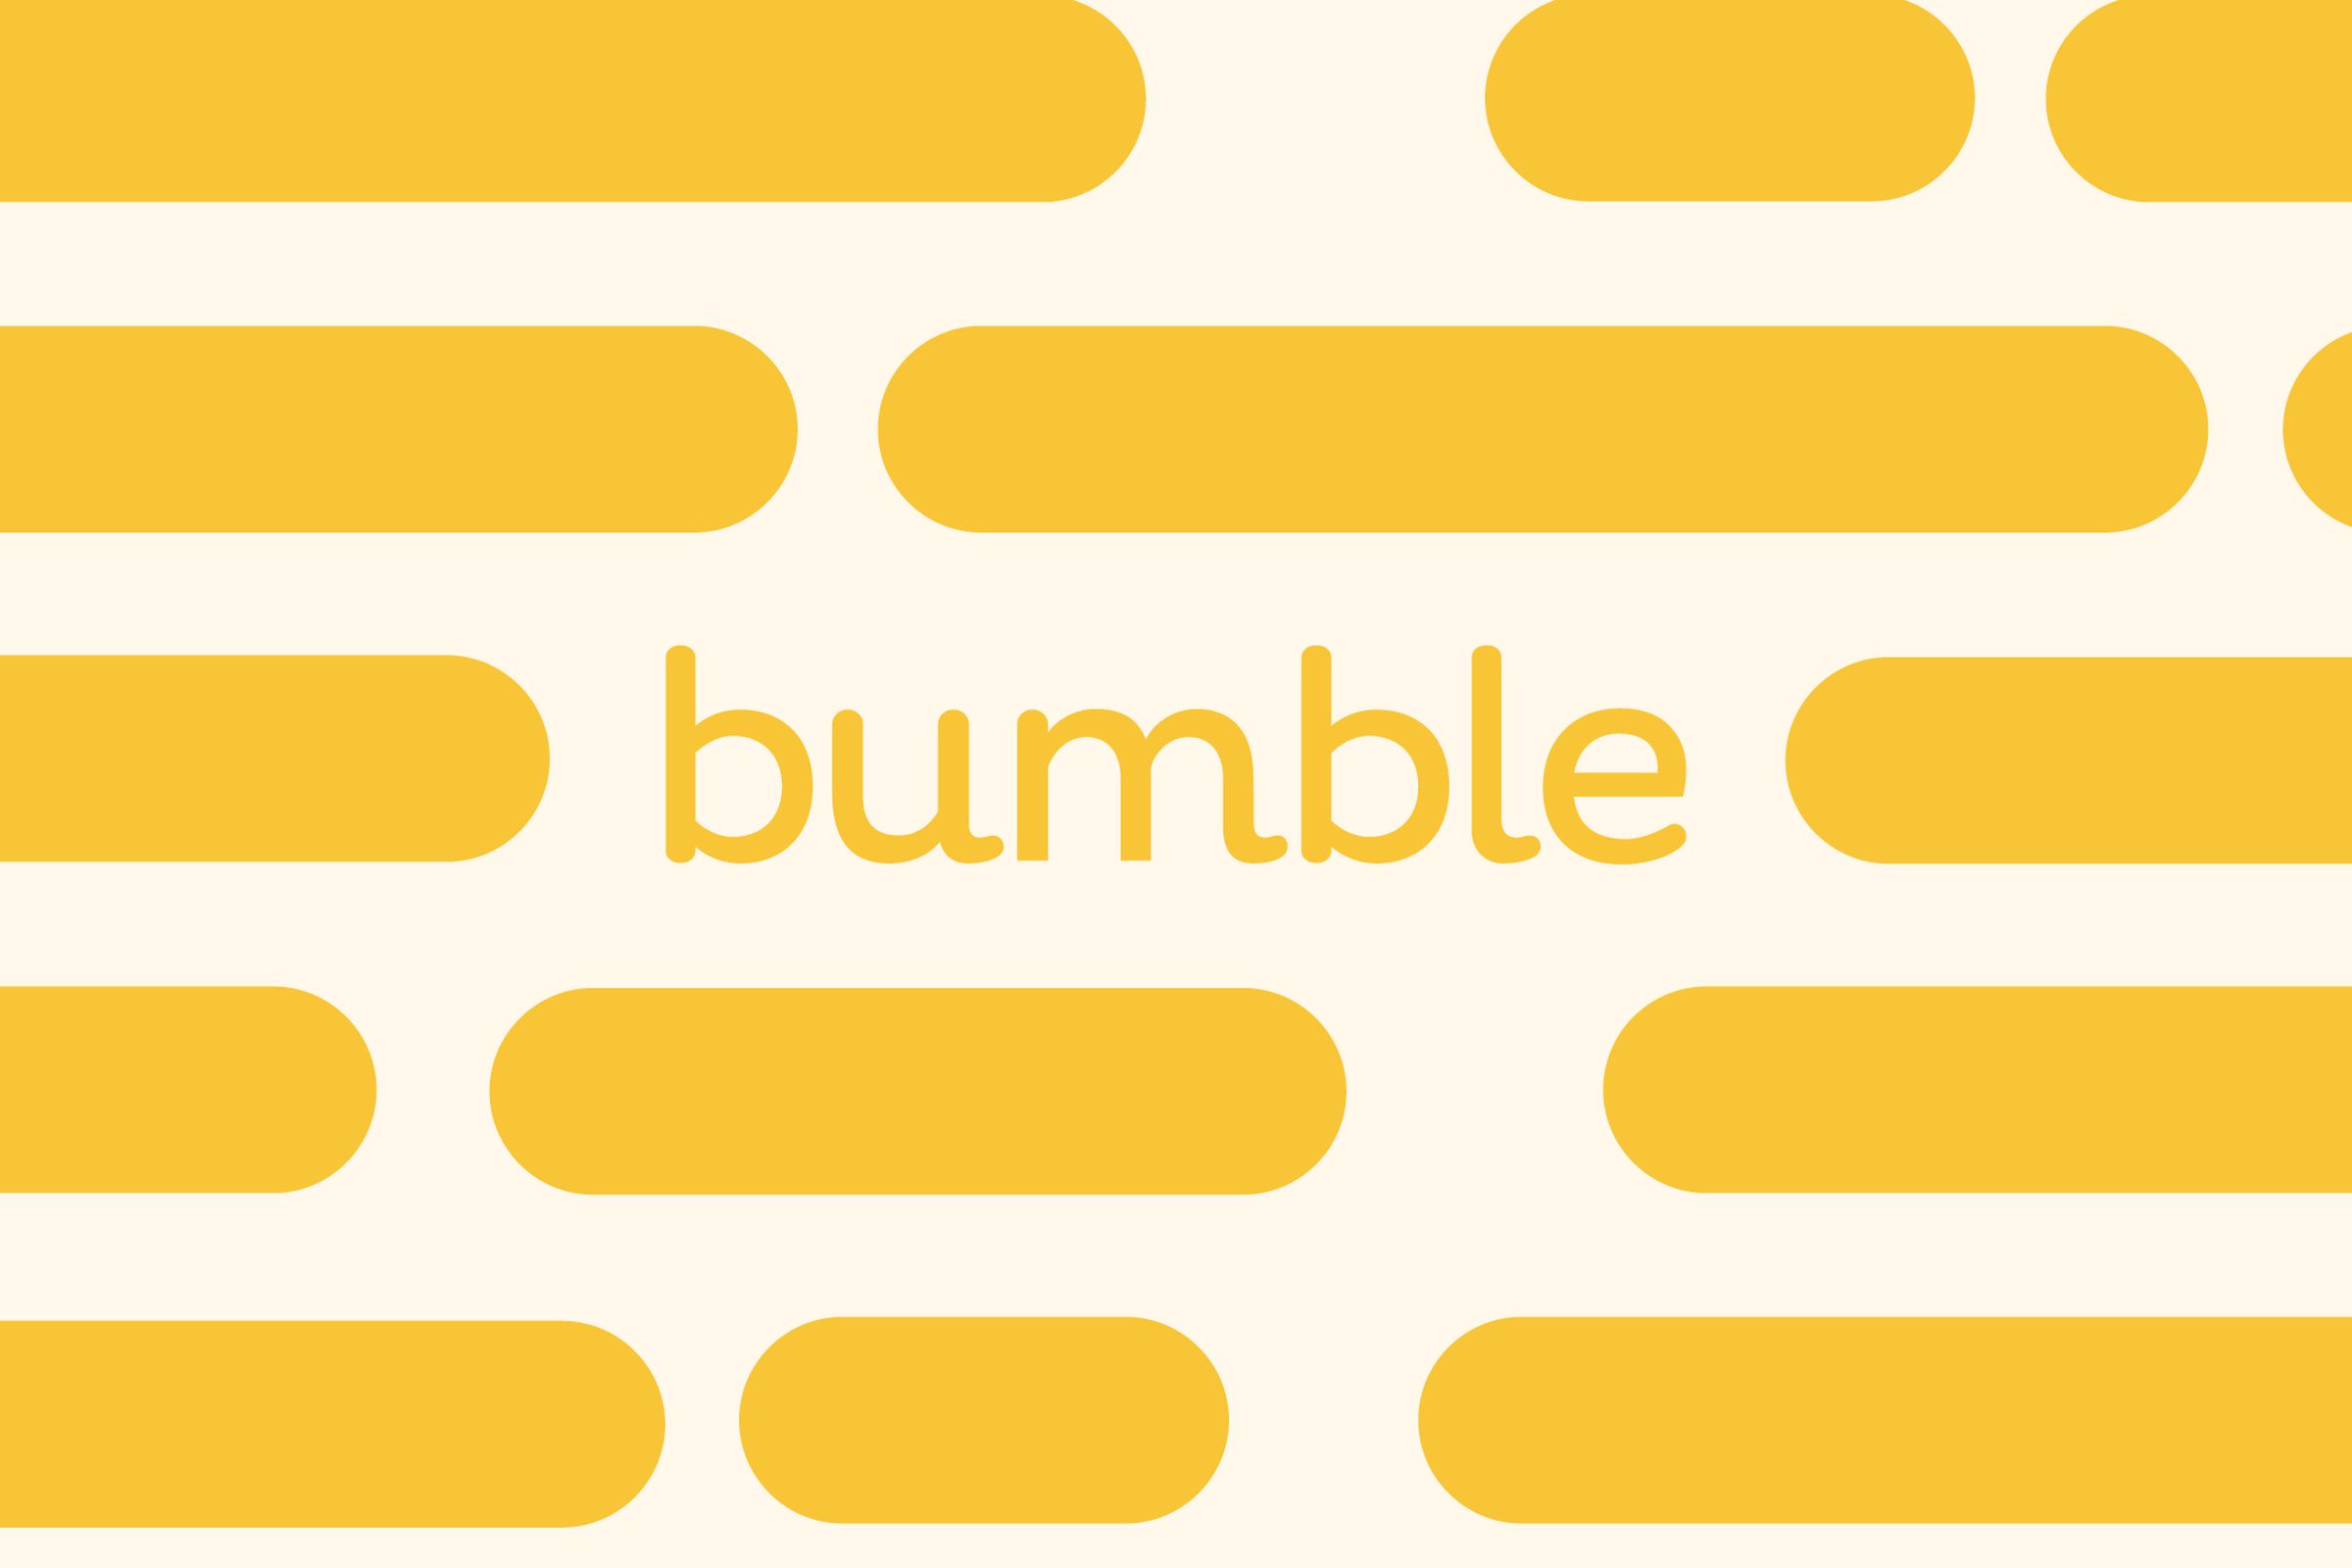 An illustration of the Bumble logo.